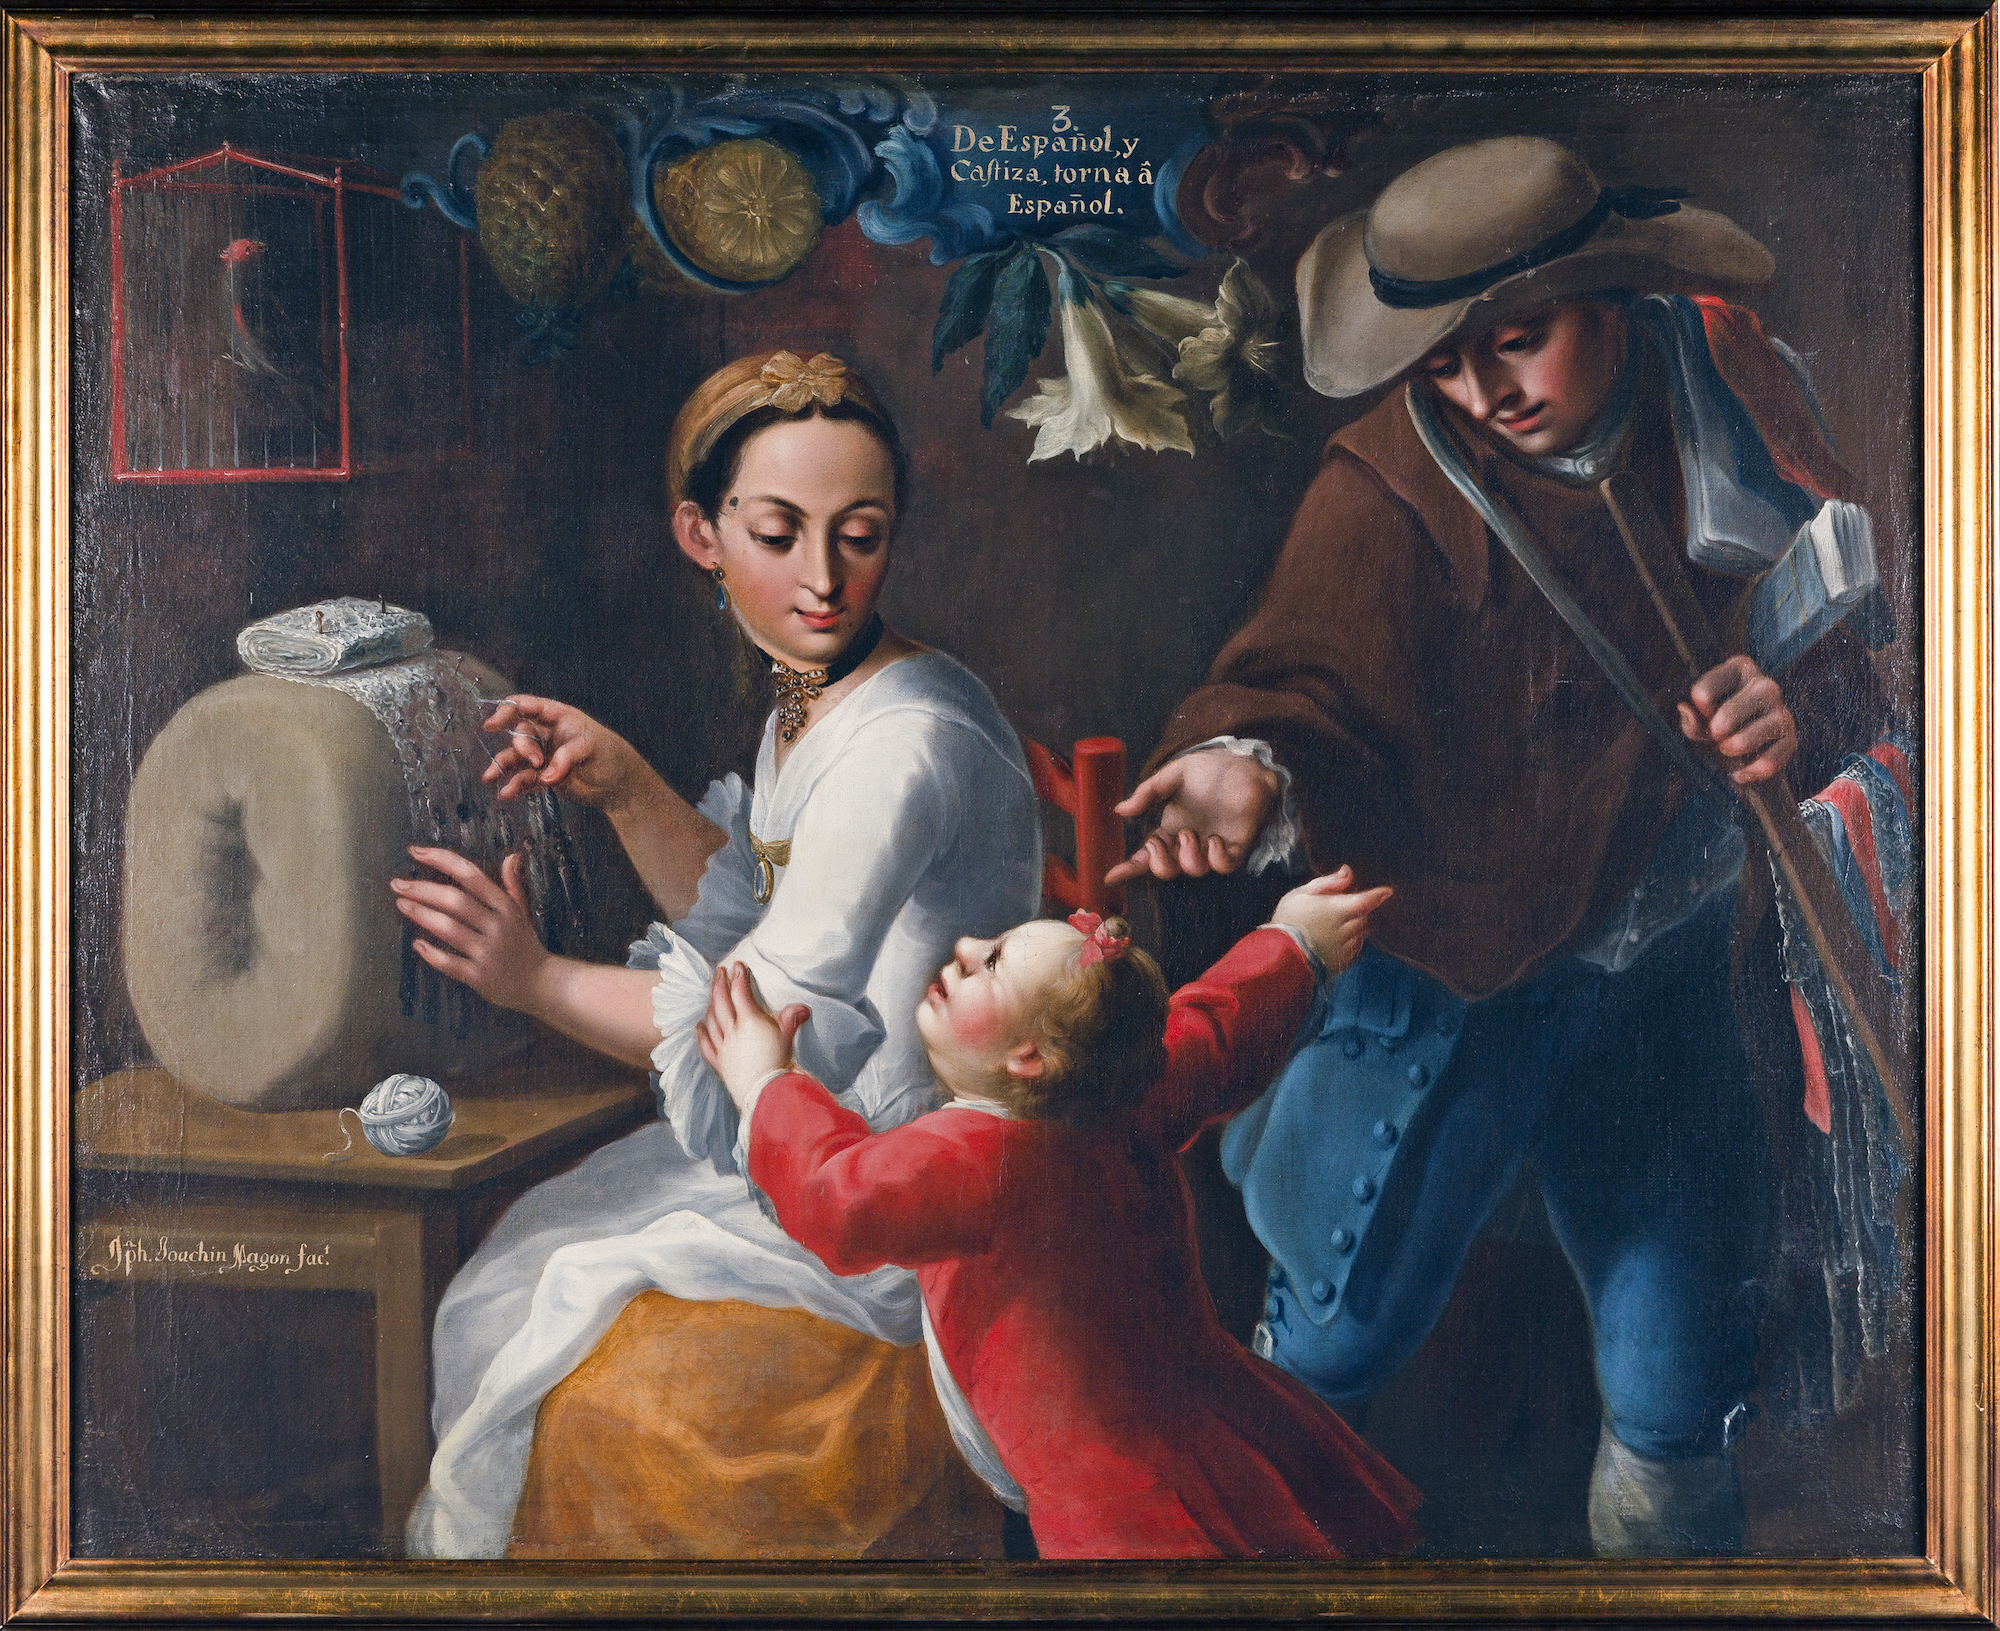 A painting of a woman stitching a garment while sat at a table. A child tugs at her arm and behind the child stands a man with a hat, holding a bag, gesturing to the child